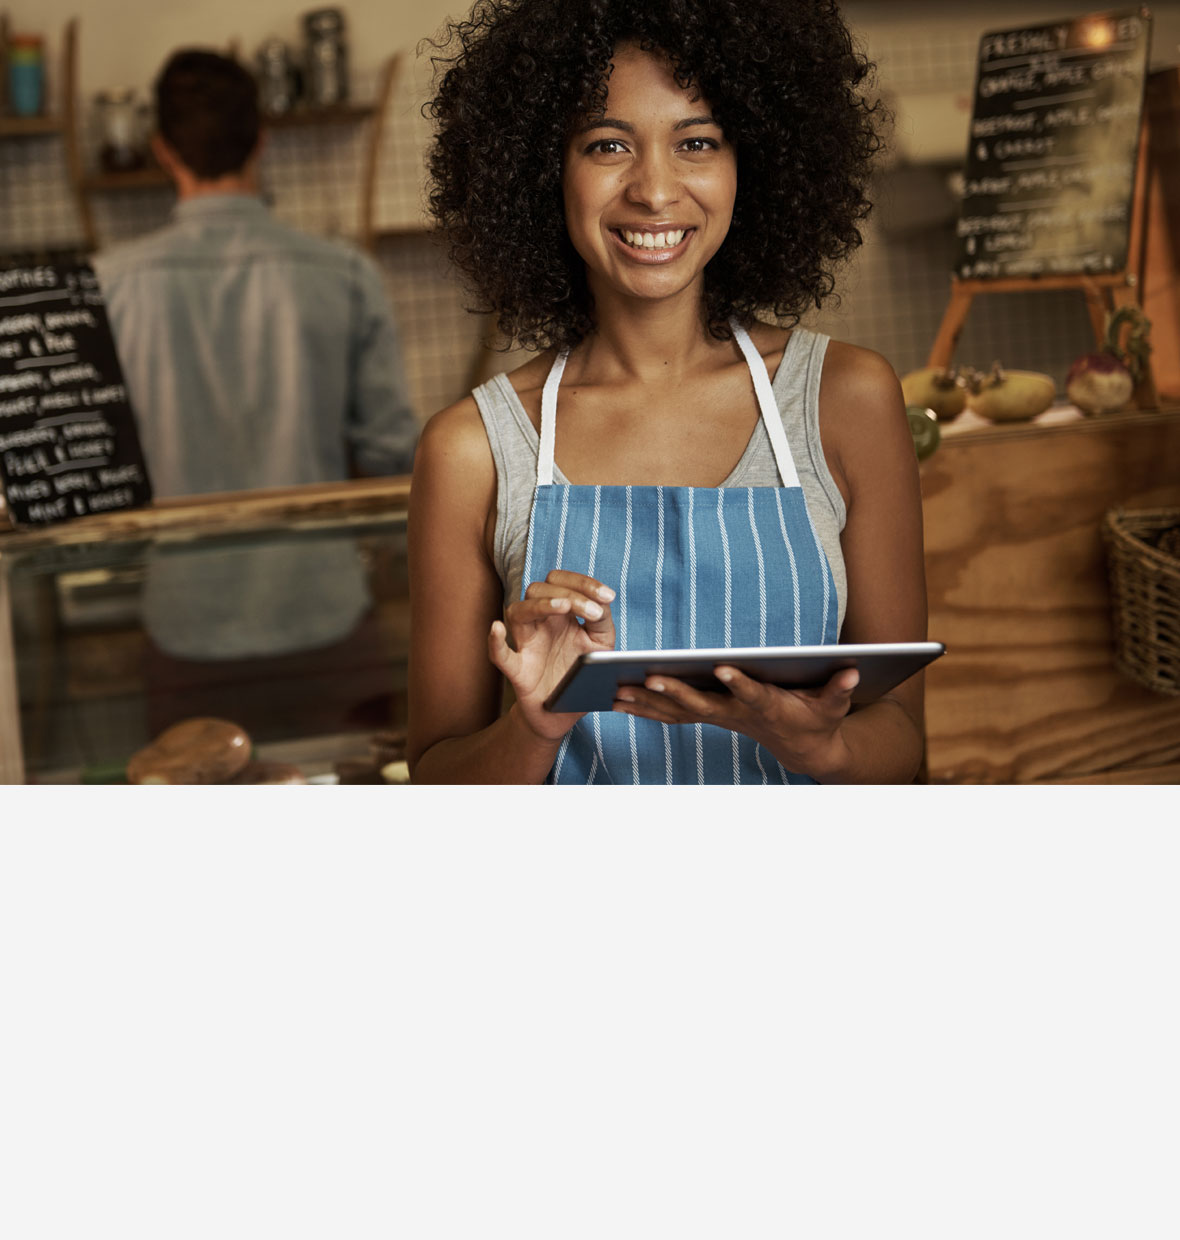 Image of a lady wearing an apron and holding a tablet in a cafe